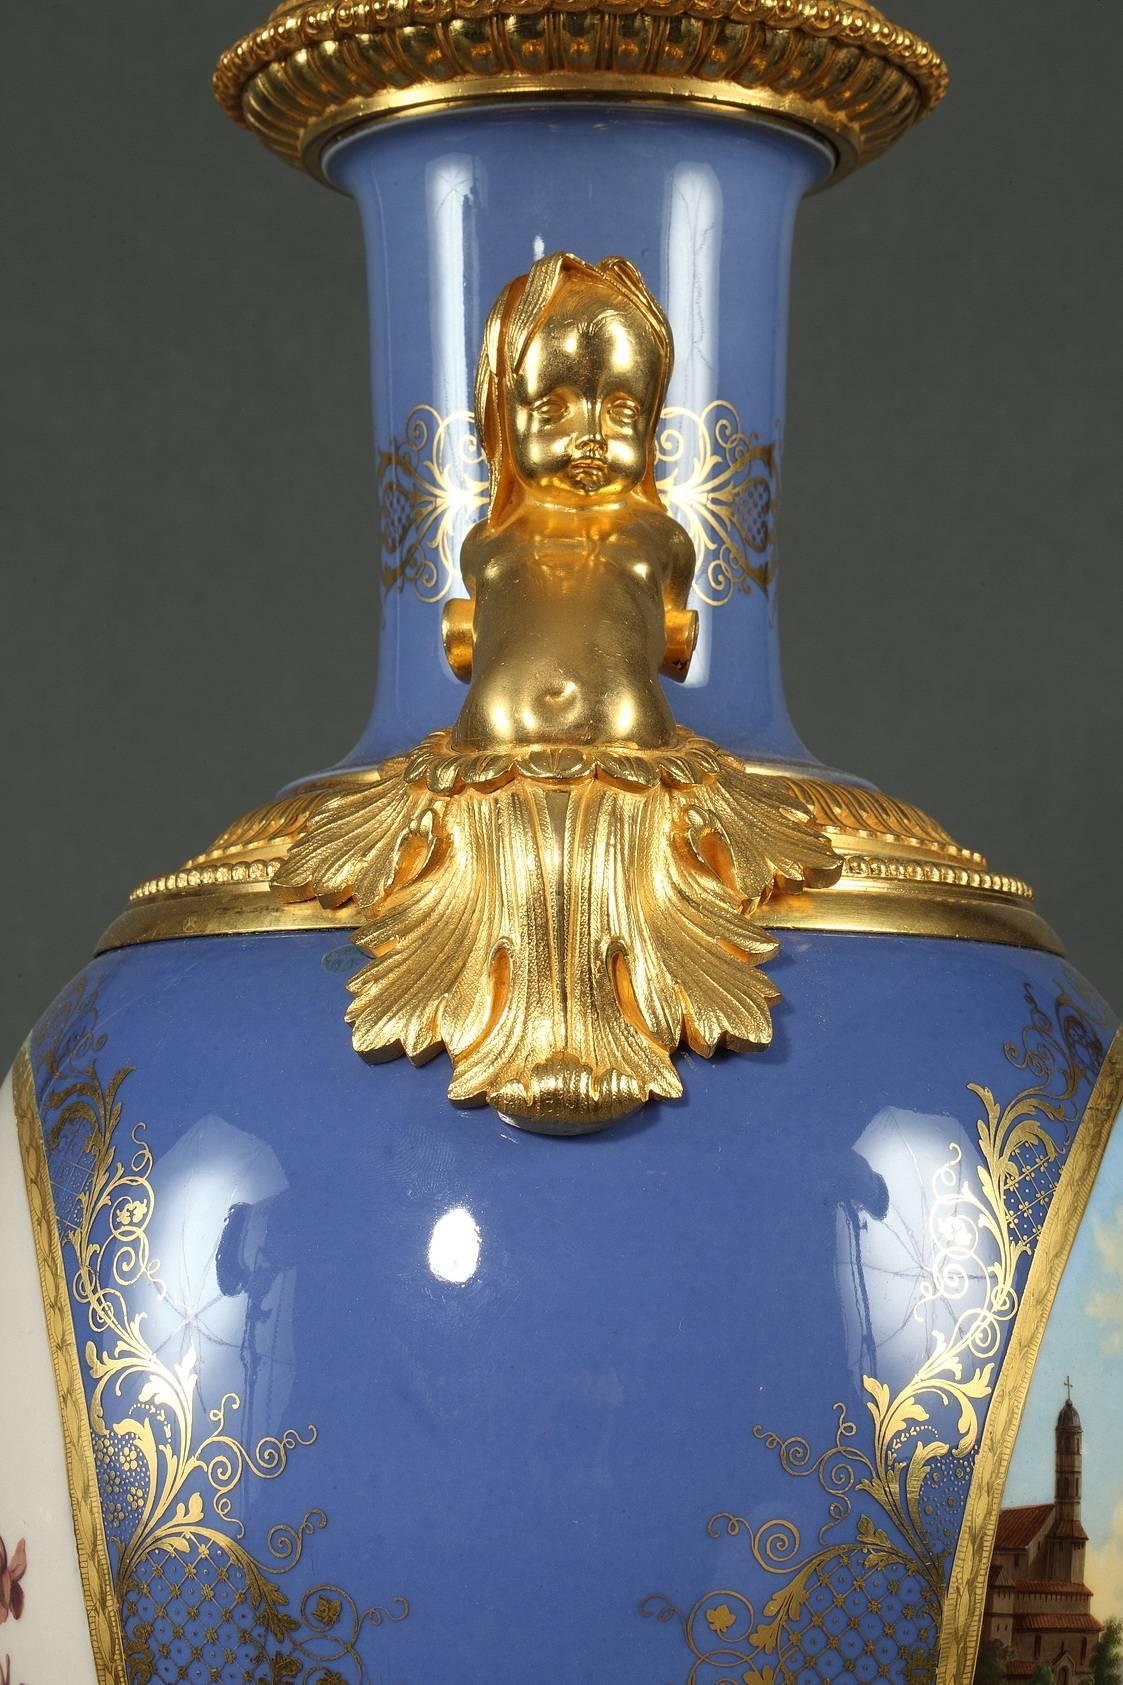 Ormolu Large Porcelain and Gilt Bronze Vases in Louis XV Style